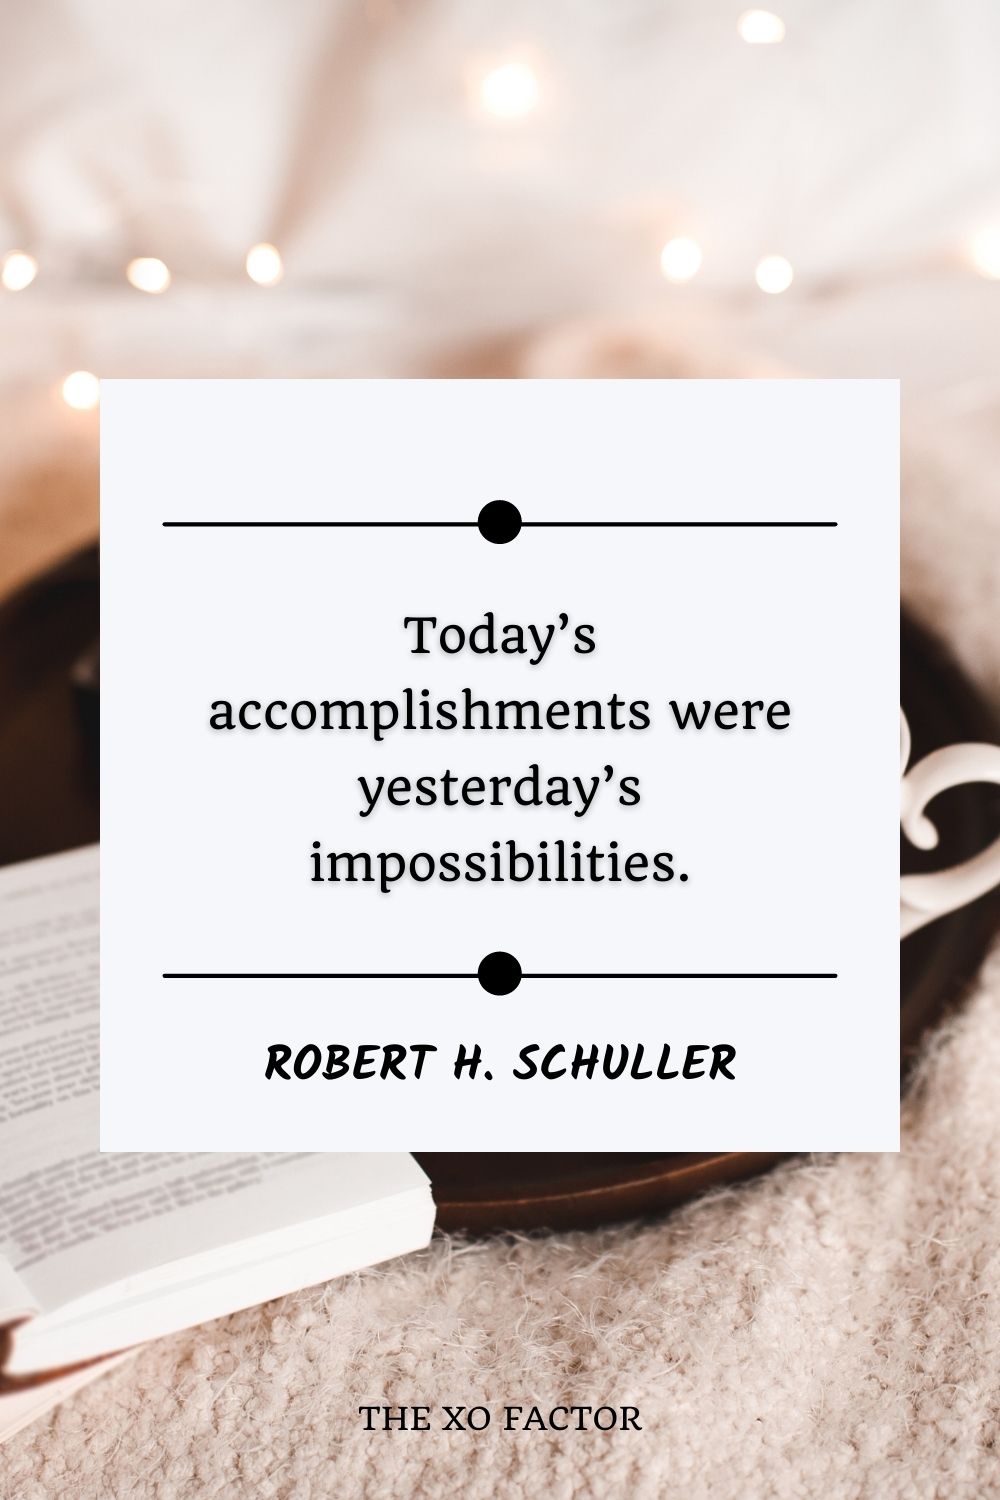 Today’s accomplishments were yesterday’s impossibilities.” – Robert H. Schuller